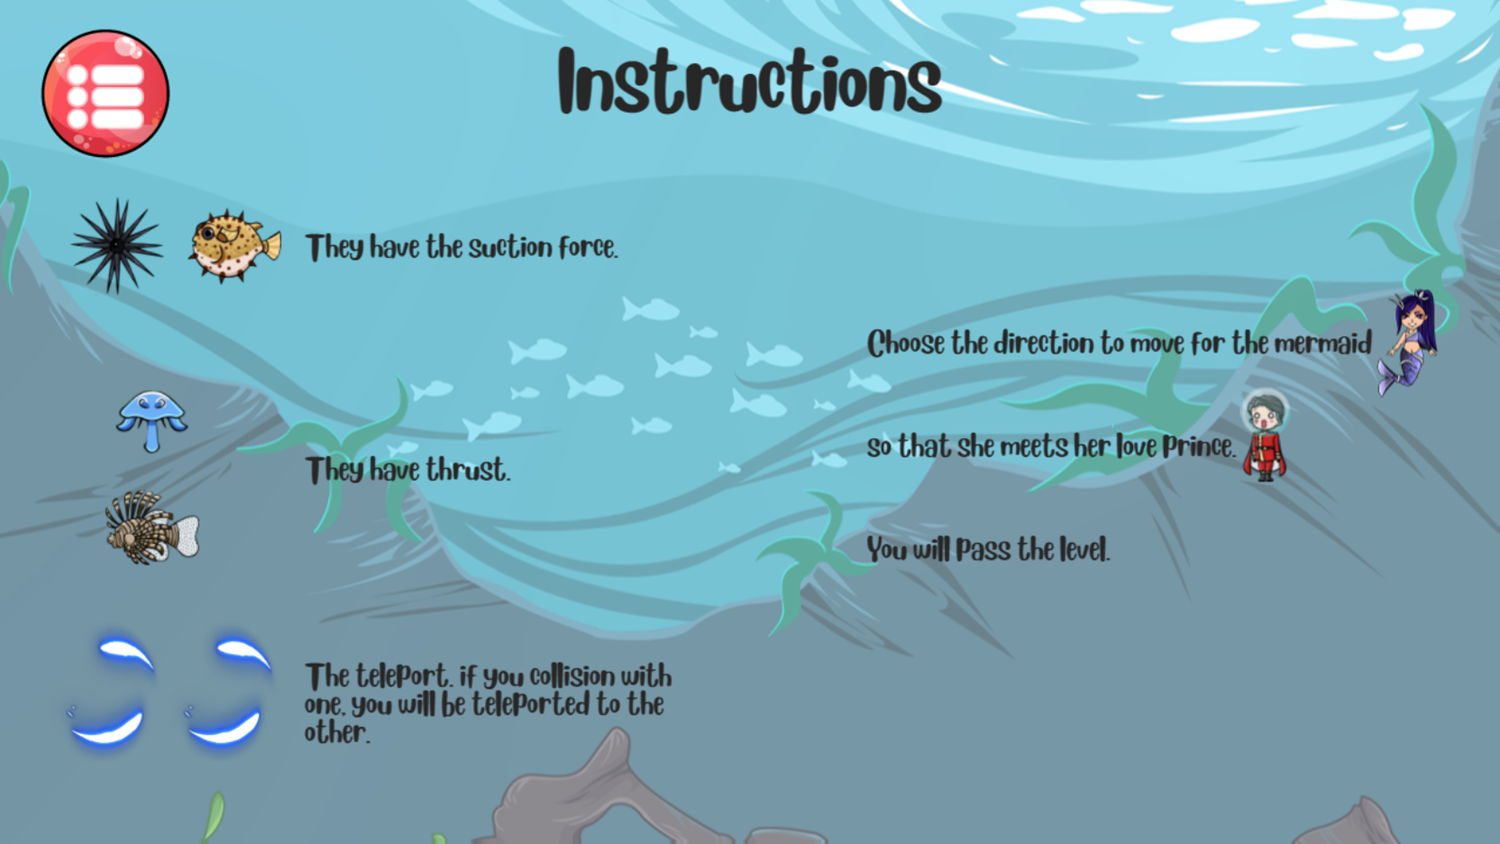 Save The Prince Game Instructions Screenshot.